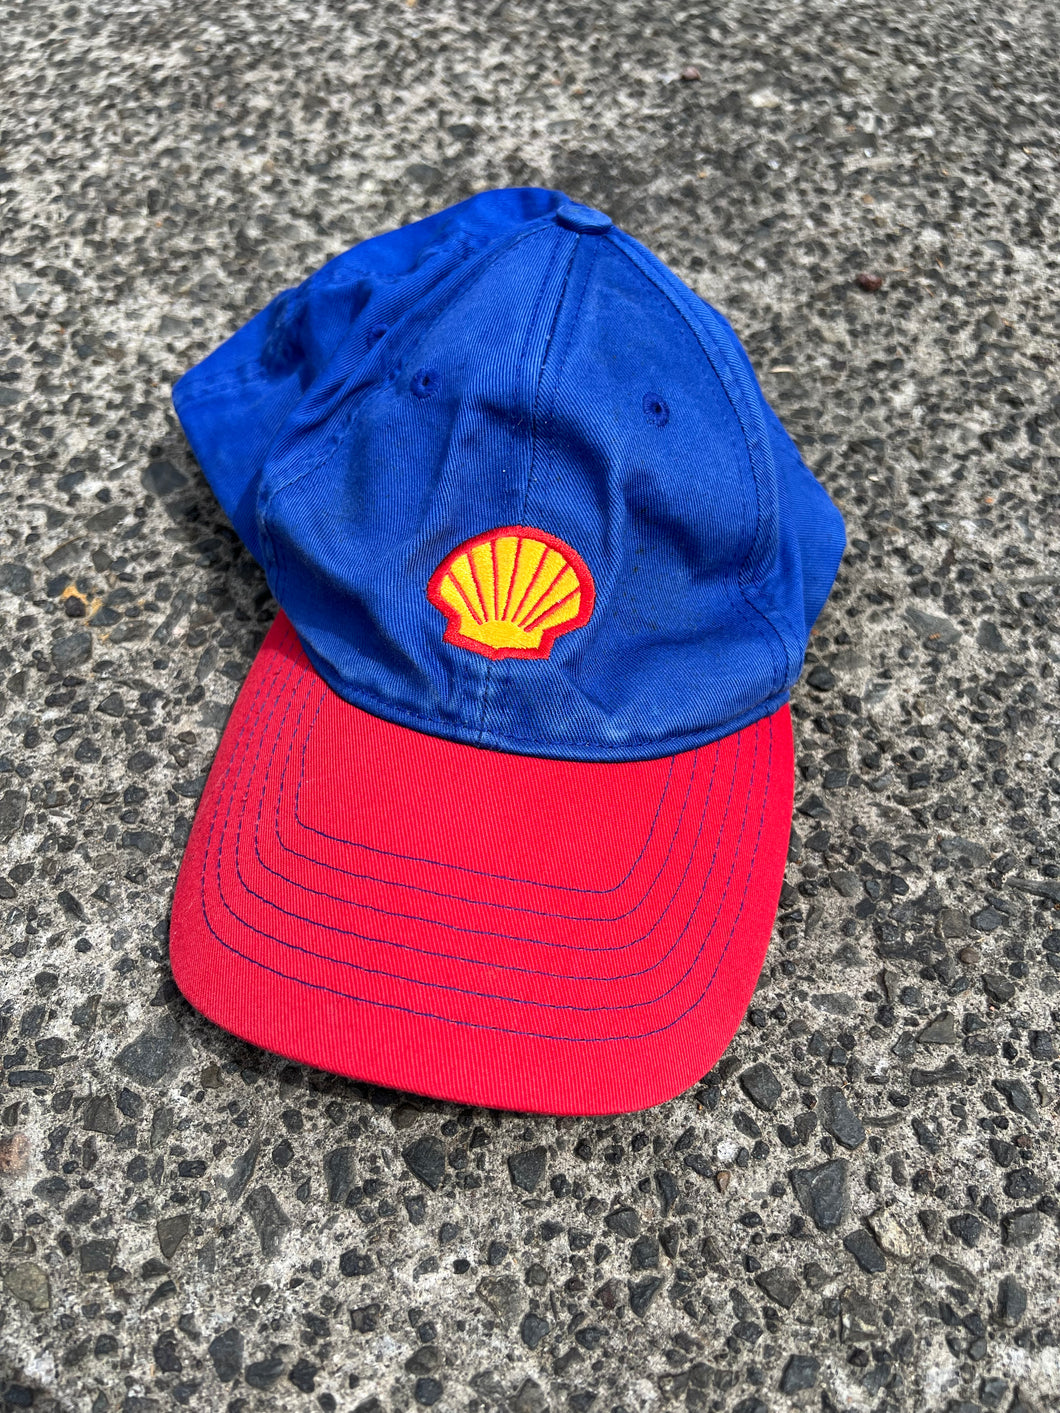 VINTAGE SHELL RACING HAT - ONE SIZE FITS ALL OSFA